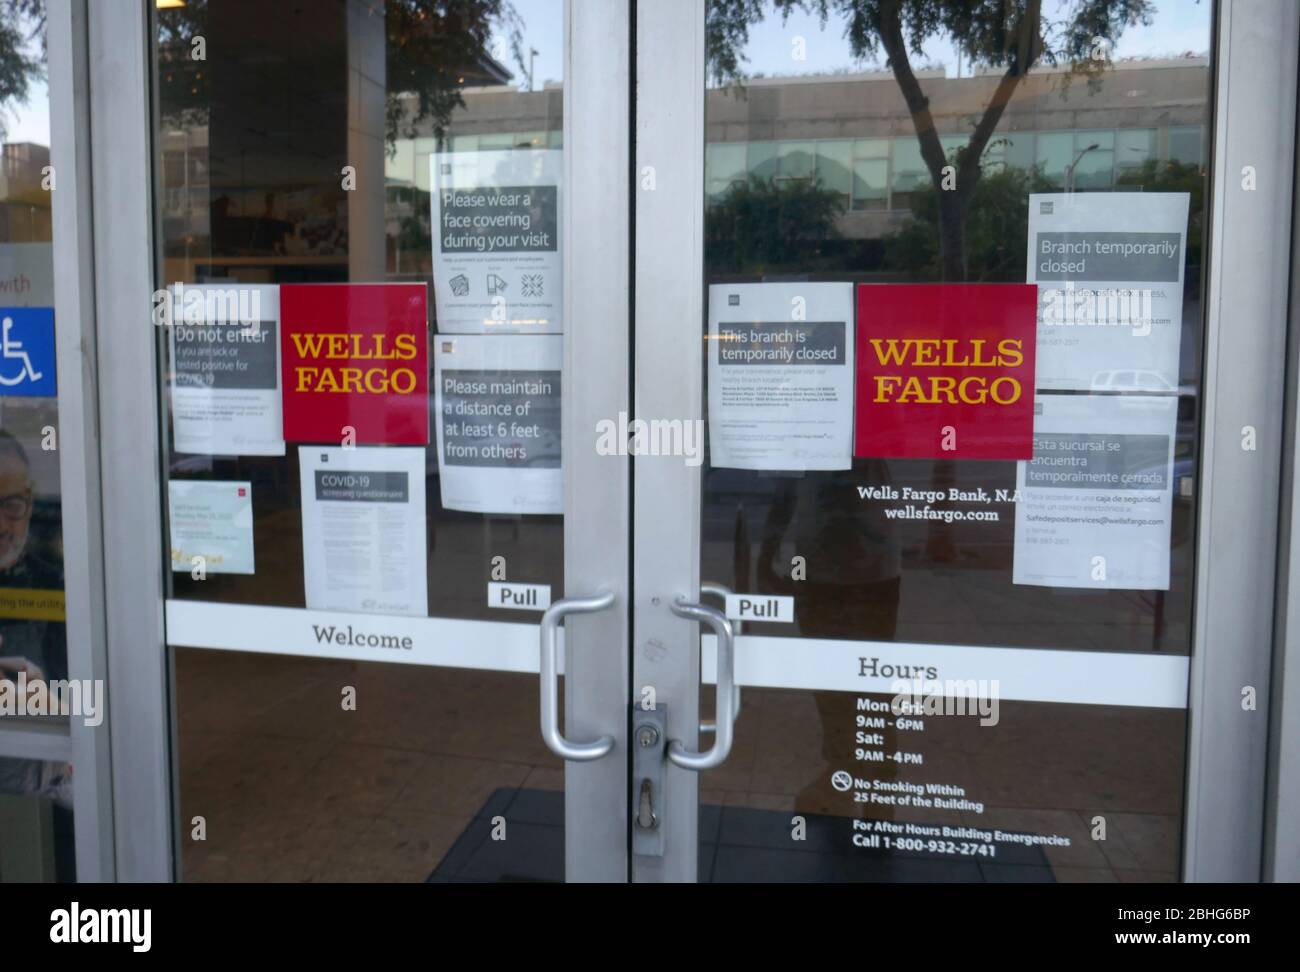 Los Angeles, California, USA 25th April 2020 A general view of atmosphere of closed Wells Fargo Bank due to coronavirus covid-19 pandemic on April 25, 2020 in Los Angeles, California, USA. Photo by Barry King/Alamy Stock Photo Stock Photo